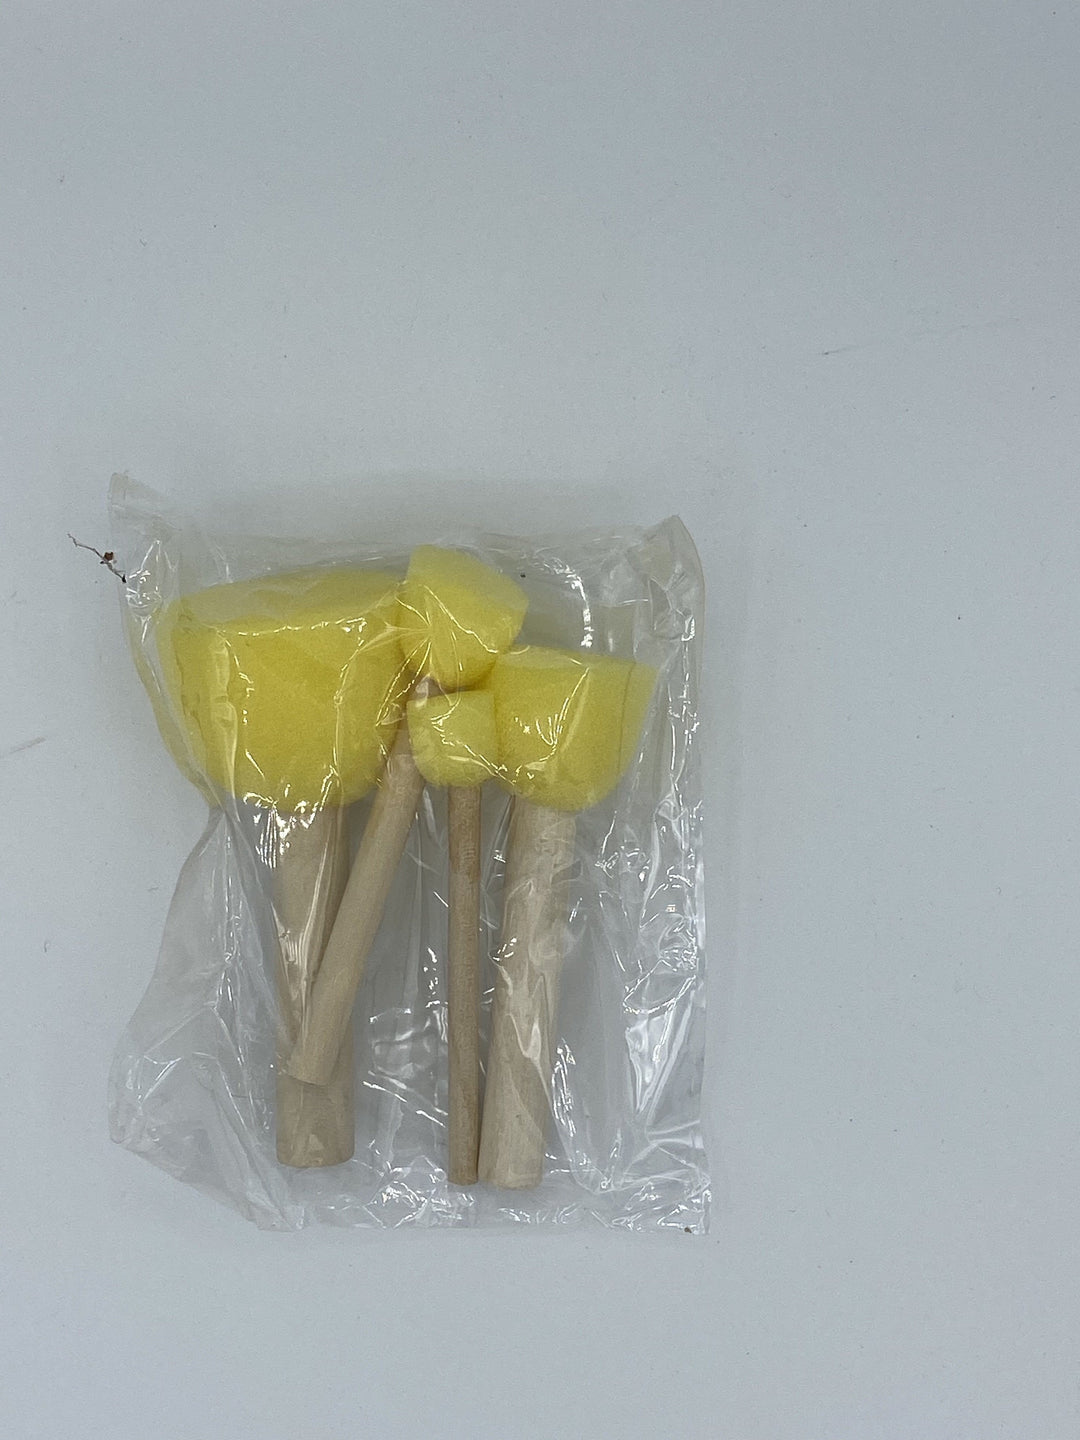 Package of 4 small foam pouncers